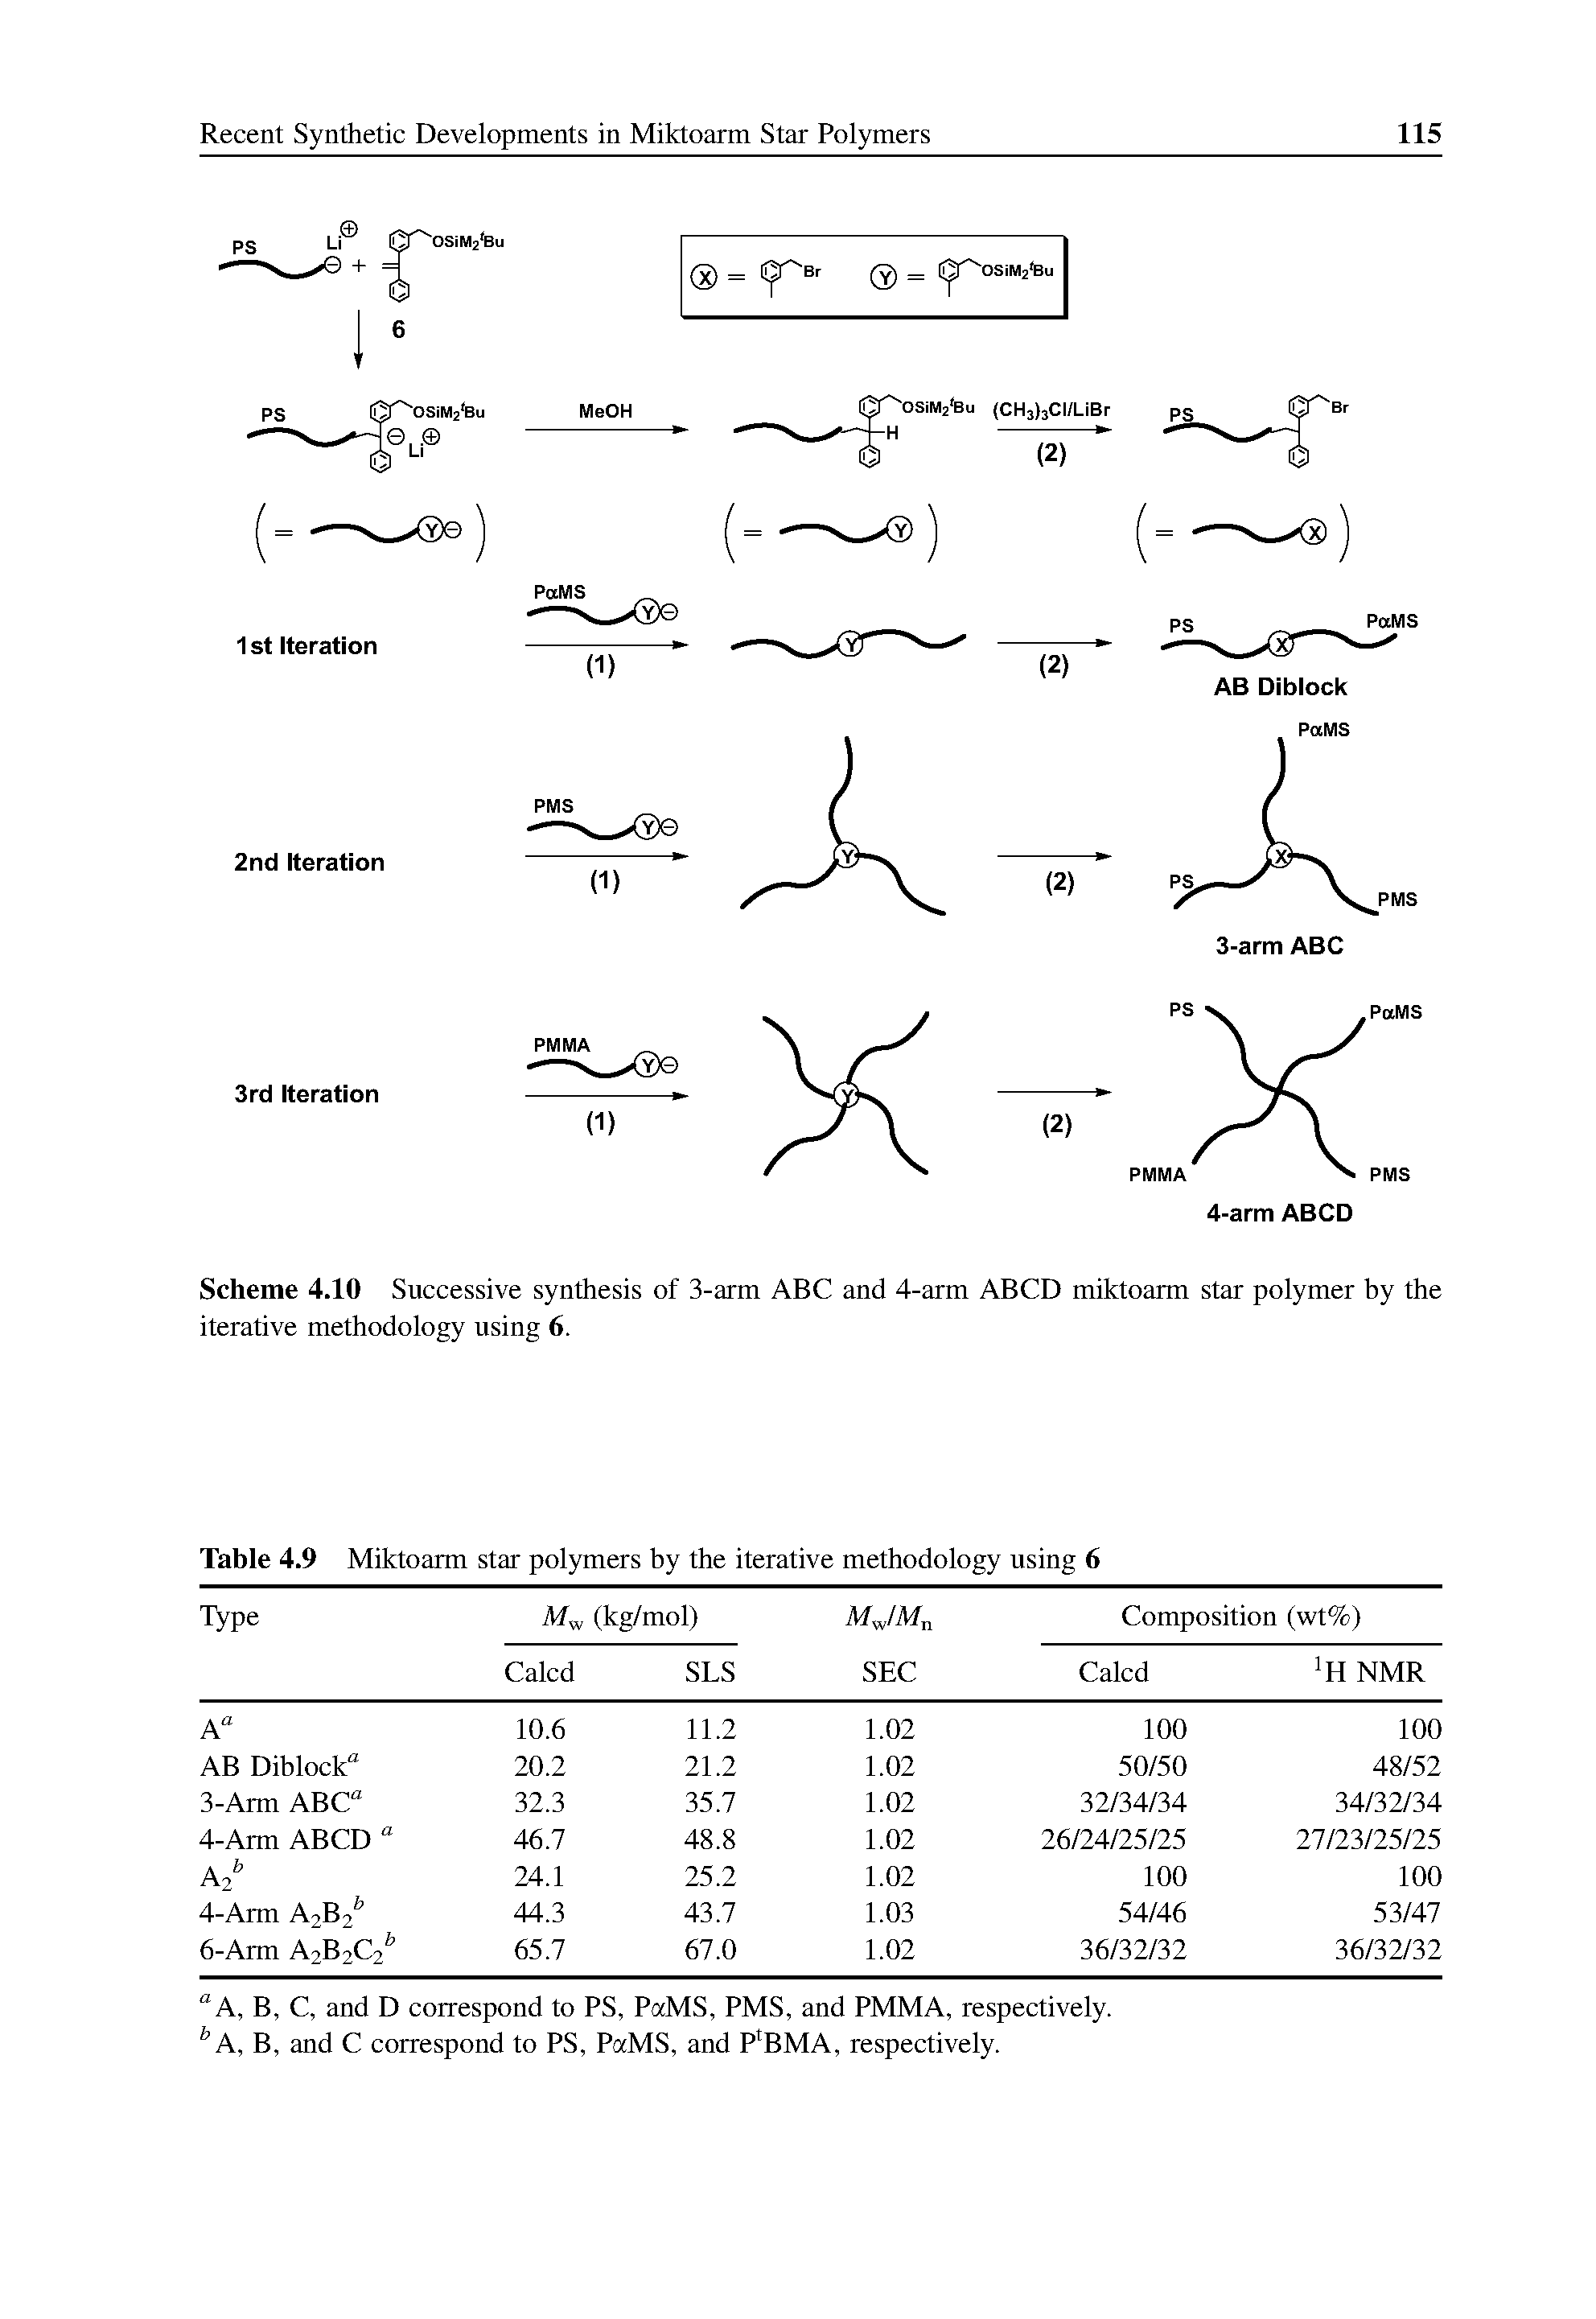 Scheme 4.10 Successive synthesis of 3-arm ABC and 4-arm ABCD miktoarm star polymer by the iterative methodology using 6.